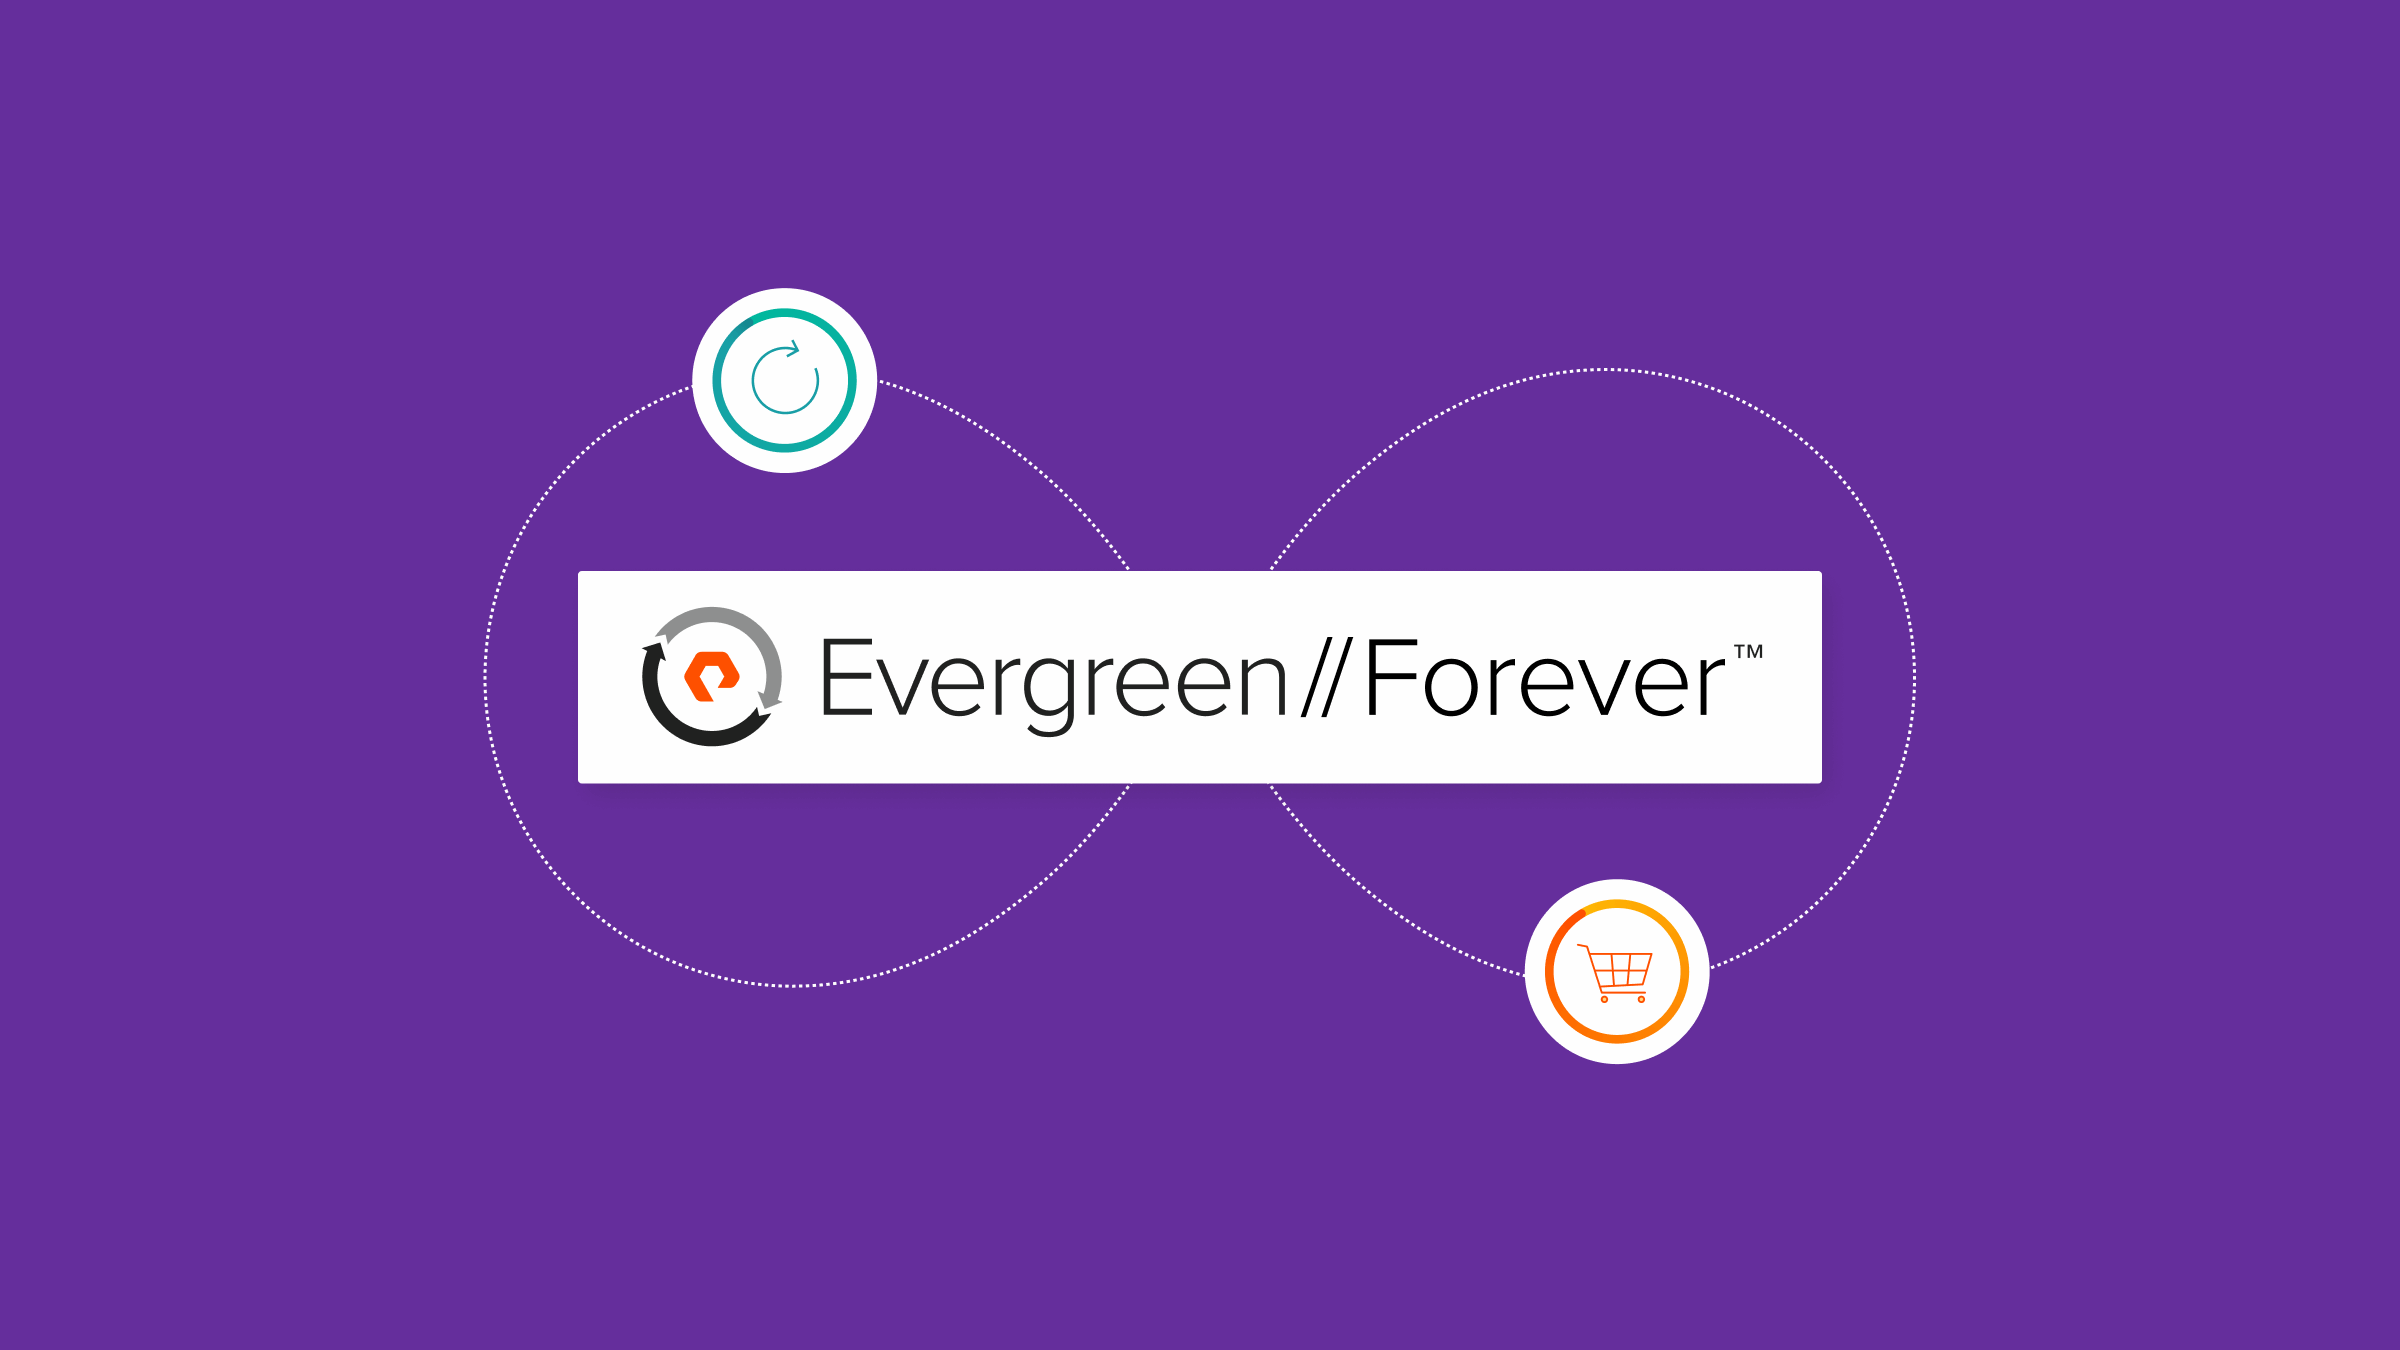 Evergreen//Forever: 創新的訂閱方案